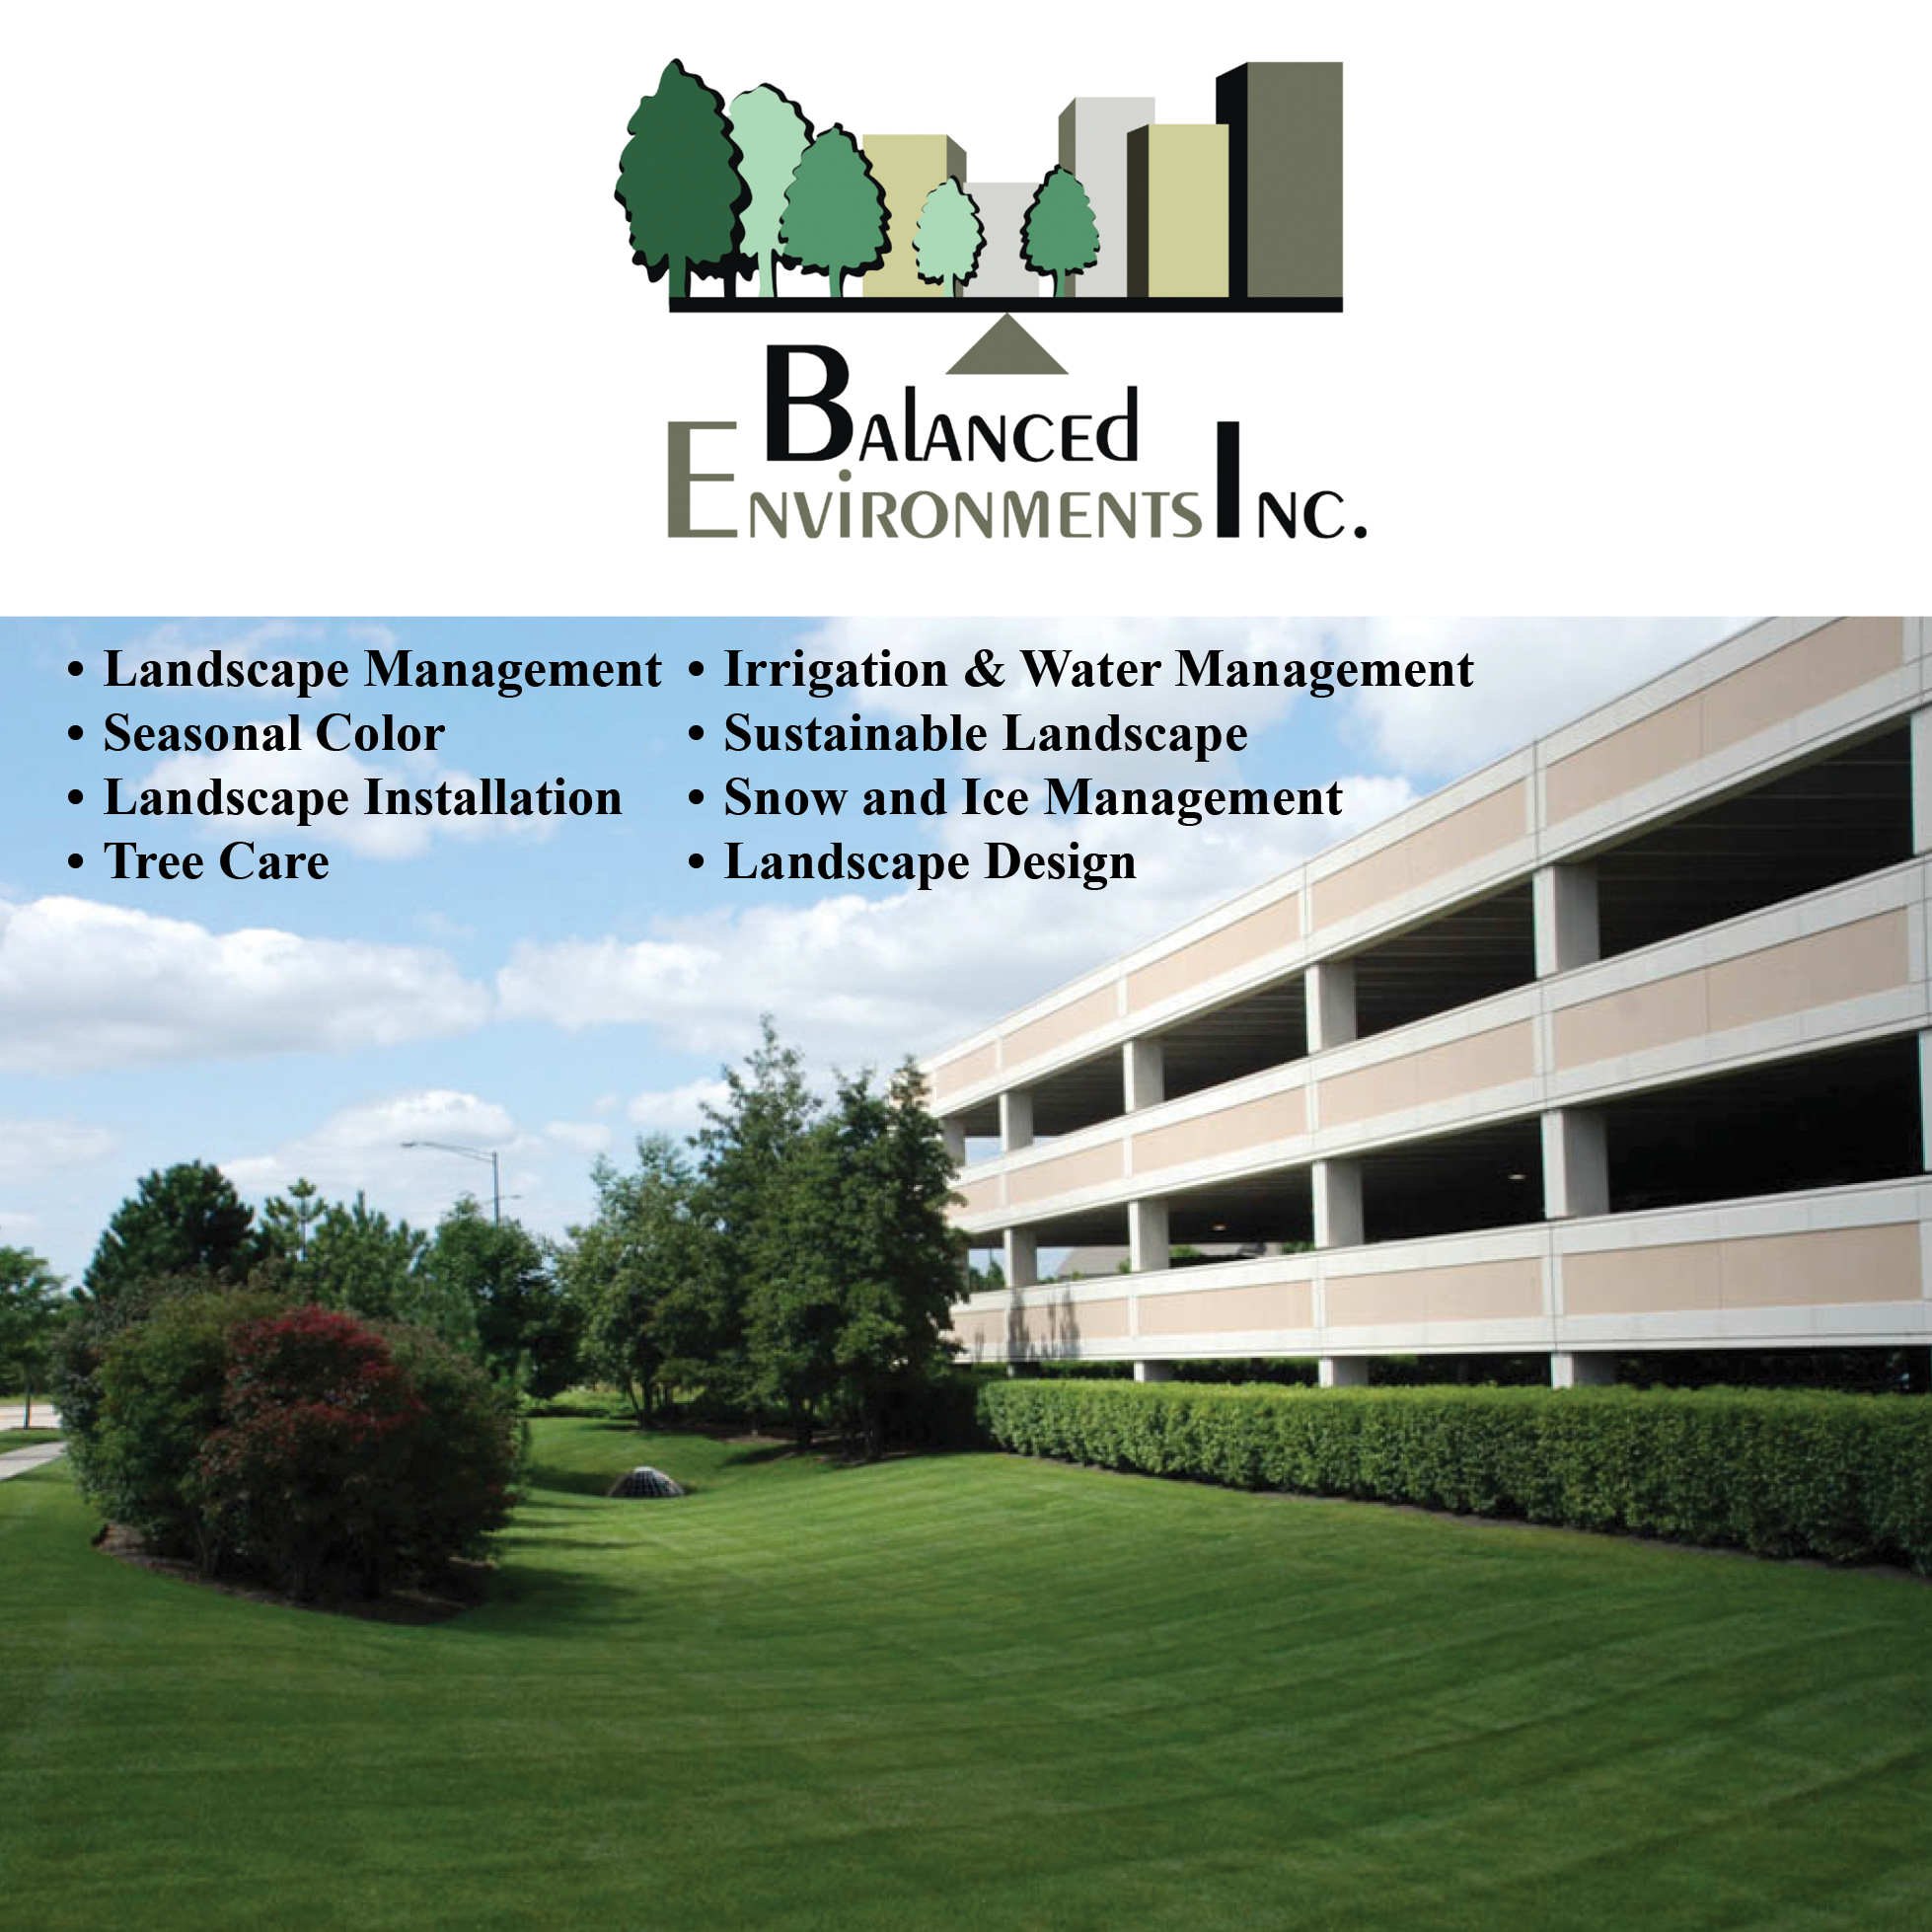 Balanced Environments, Inc. provides the best solutions to meet all landscape budgets for commercial property managers and homeowners associations throughout Chicagoland, Southern Wisconsin and Northwest Indiana. We work to balance environmental management with the highest levels of curb appeal to meet any budget.